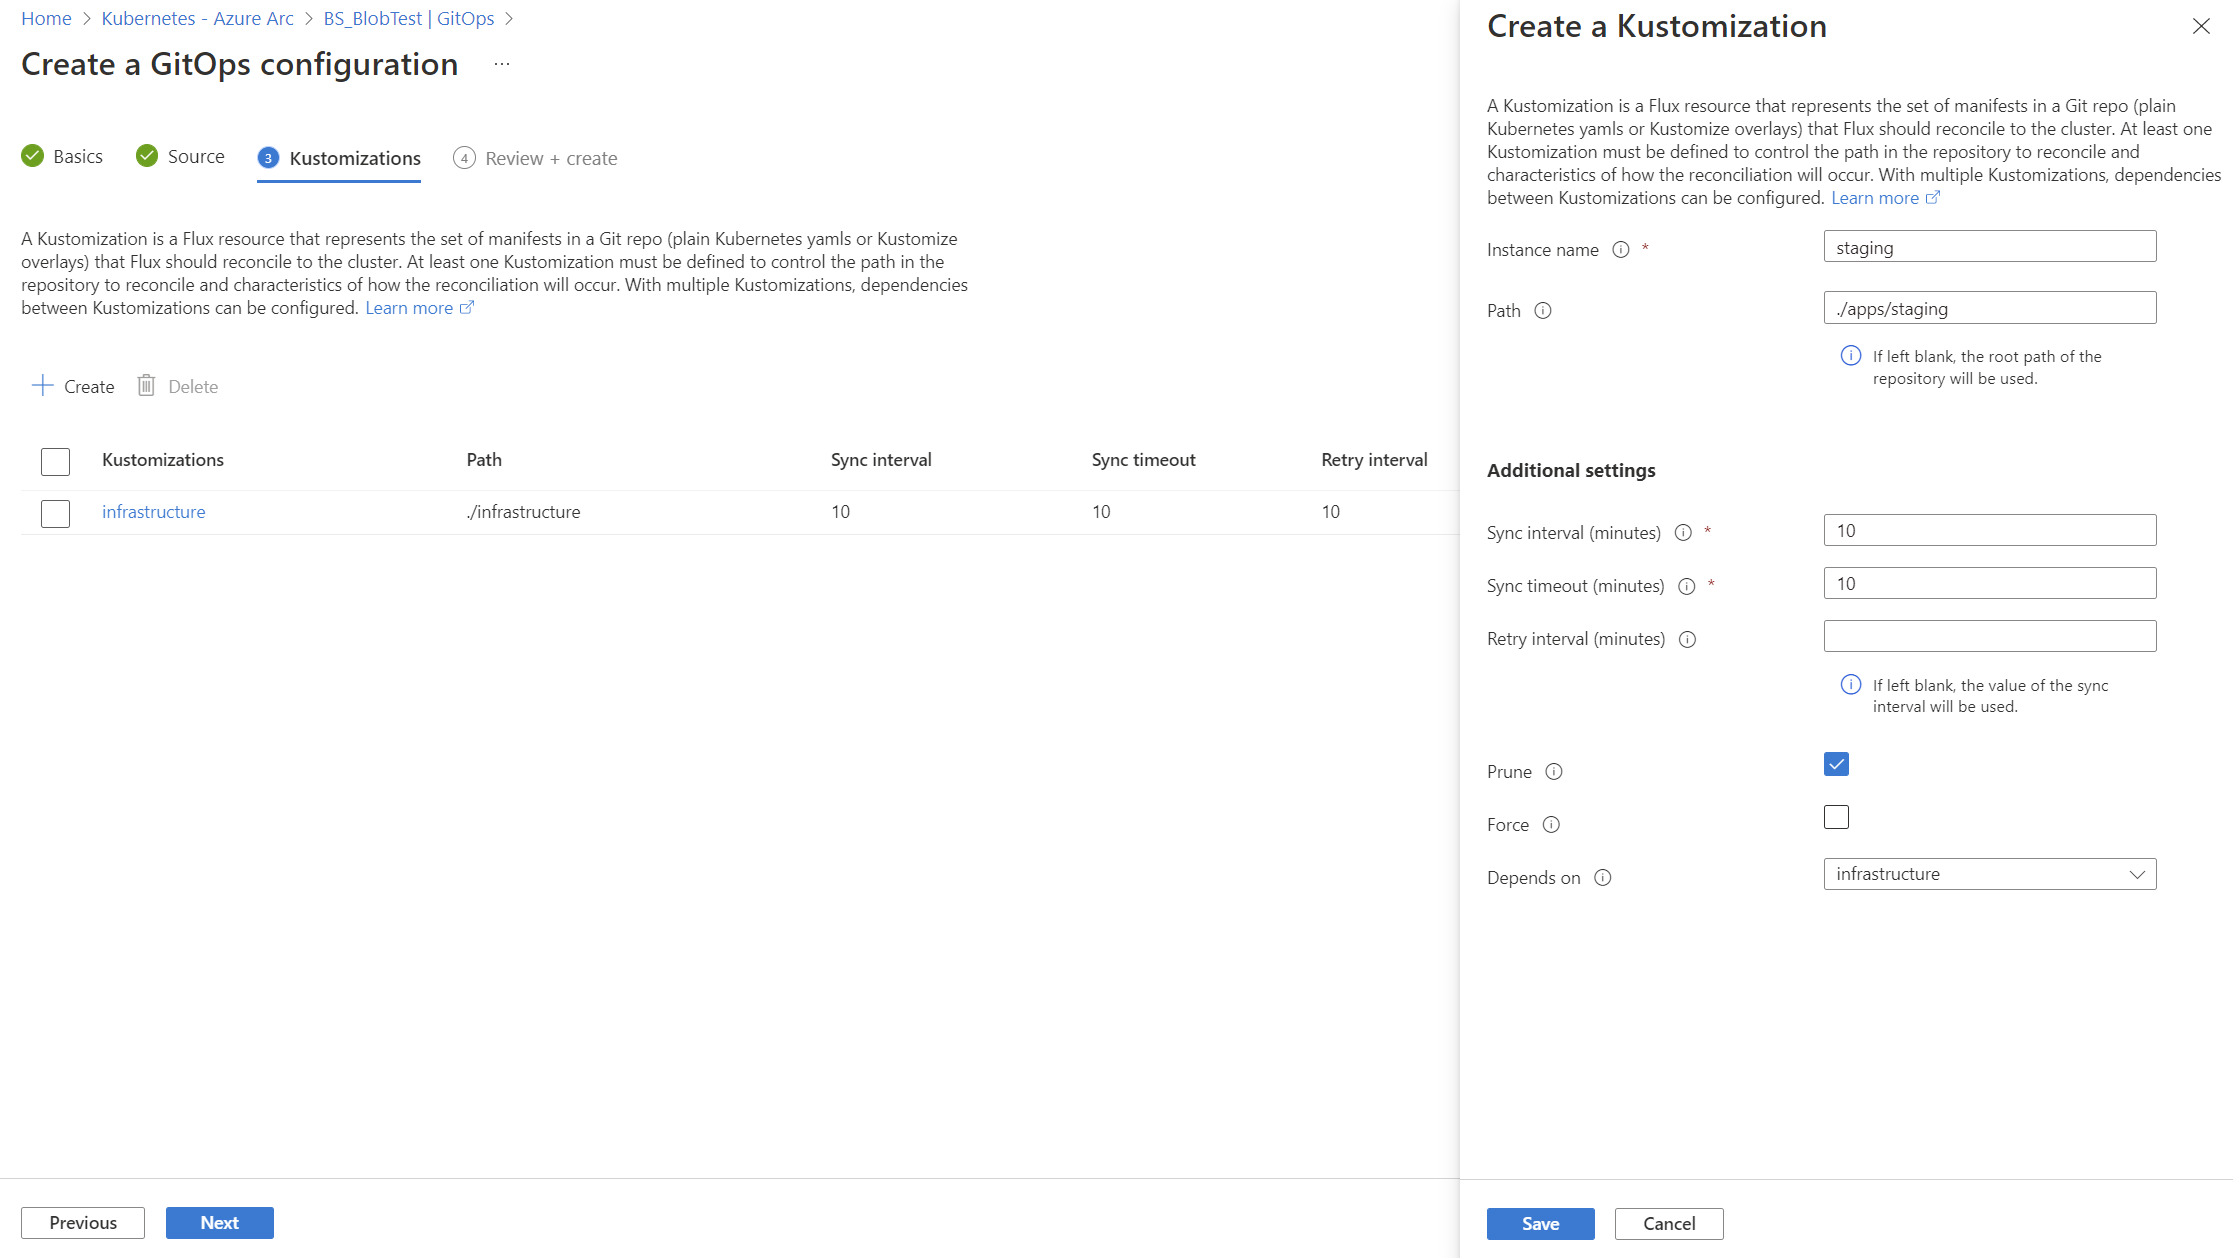 Screenshot showing the options to create the staging kustomization in the Azure portal.